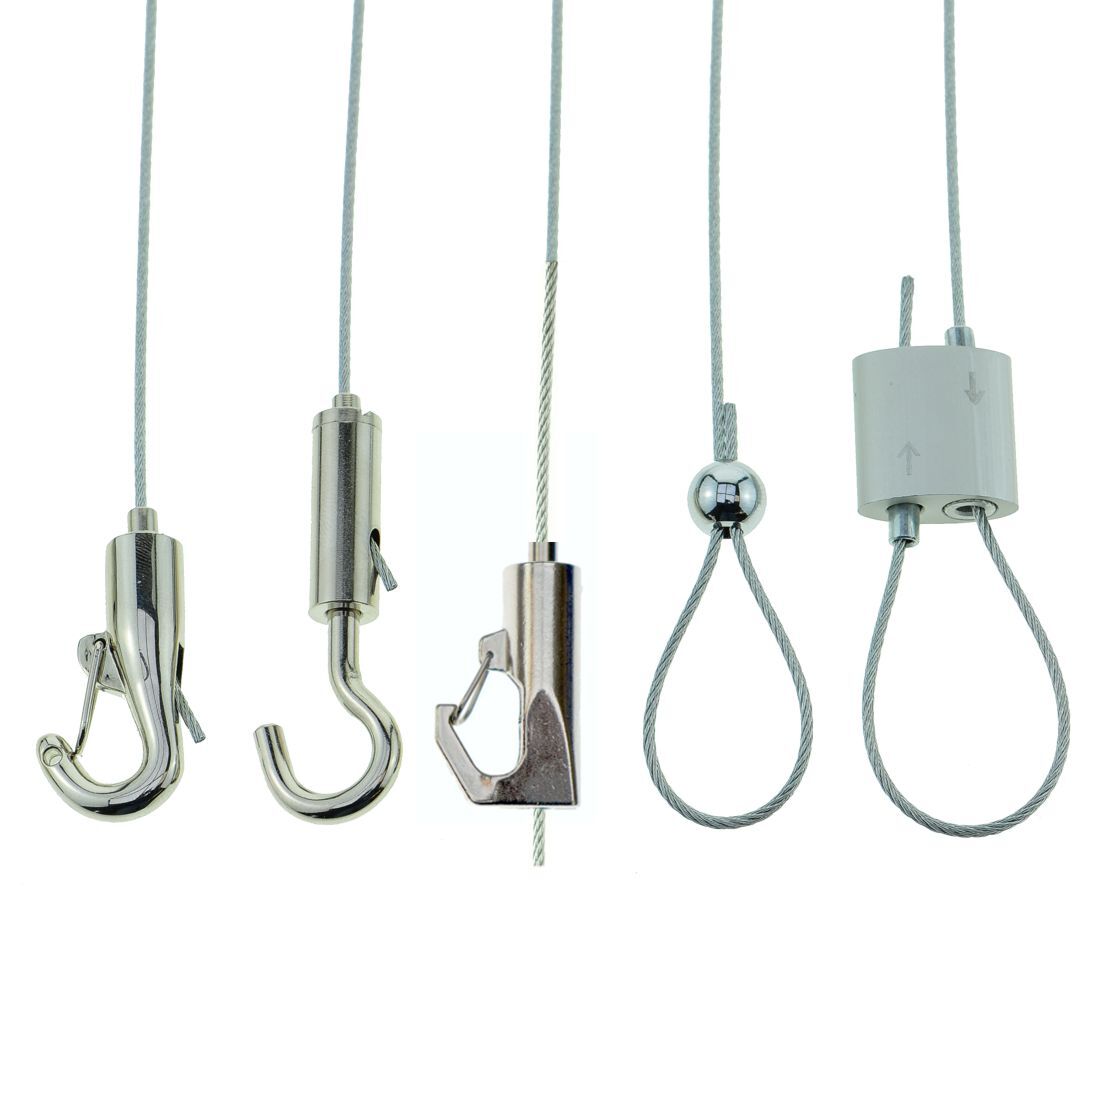 Adjustable Height Hooks Cable Gripper Use With Wire Rope To Hang